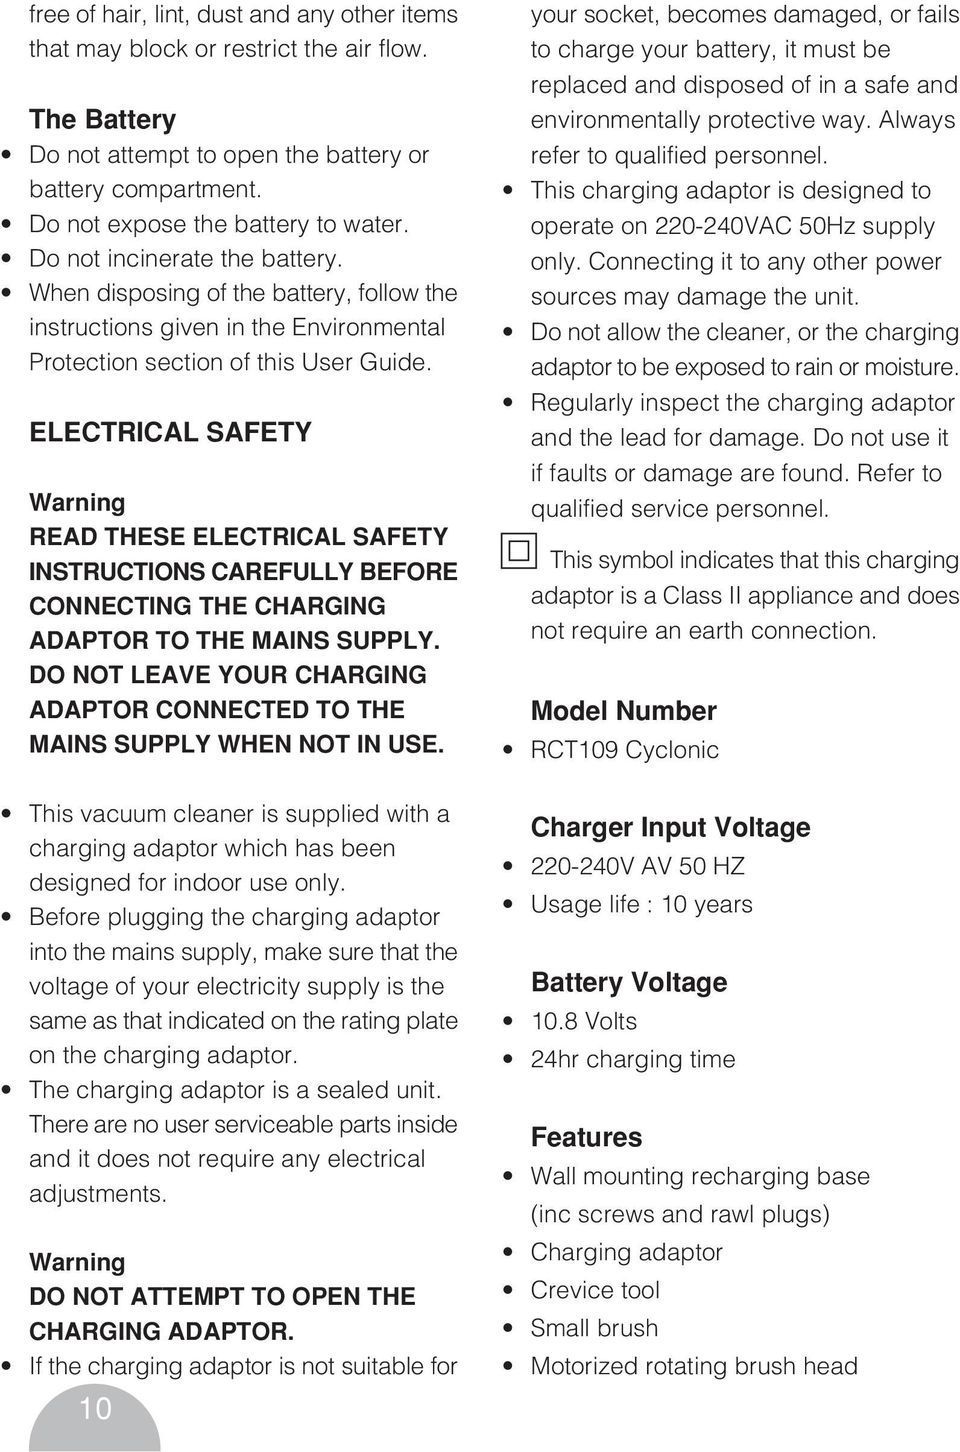 ELECTRICAL SAFETY Warning READ THESE ELECTRICAL SAFETY INSTRUCTIONS CAREFULLY BEFORE CONNECTING THE CHARGING ADAPTOR TO THE MAINS SUPPLY.